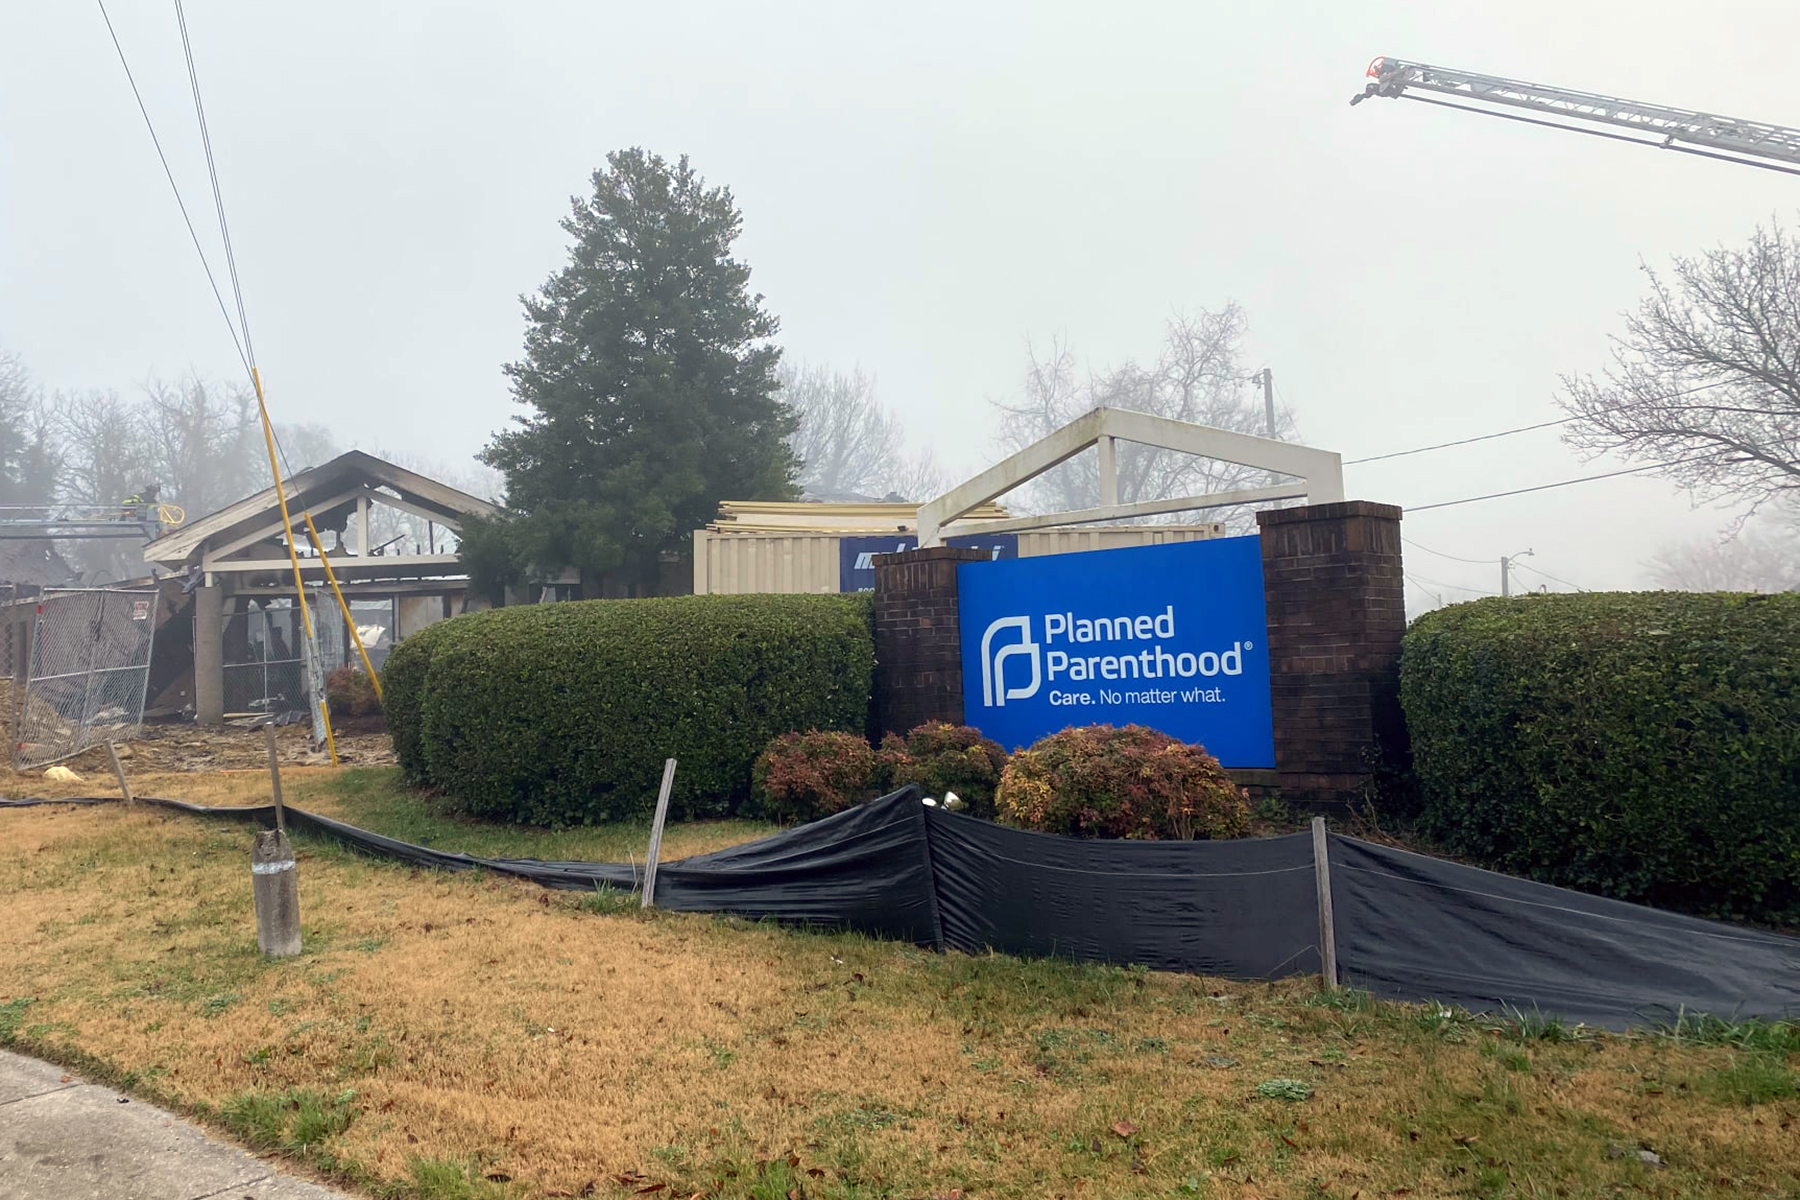 A Planned Parenthood Was Burned Down. This Is Just the Latest in Knoxville’s War Over Abortion